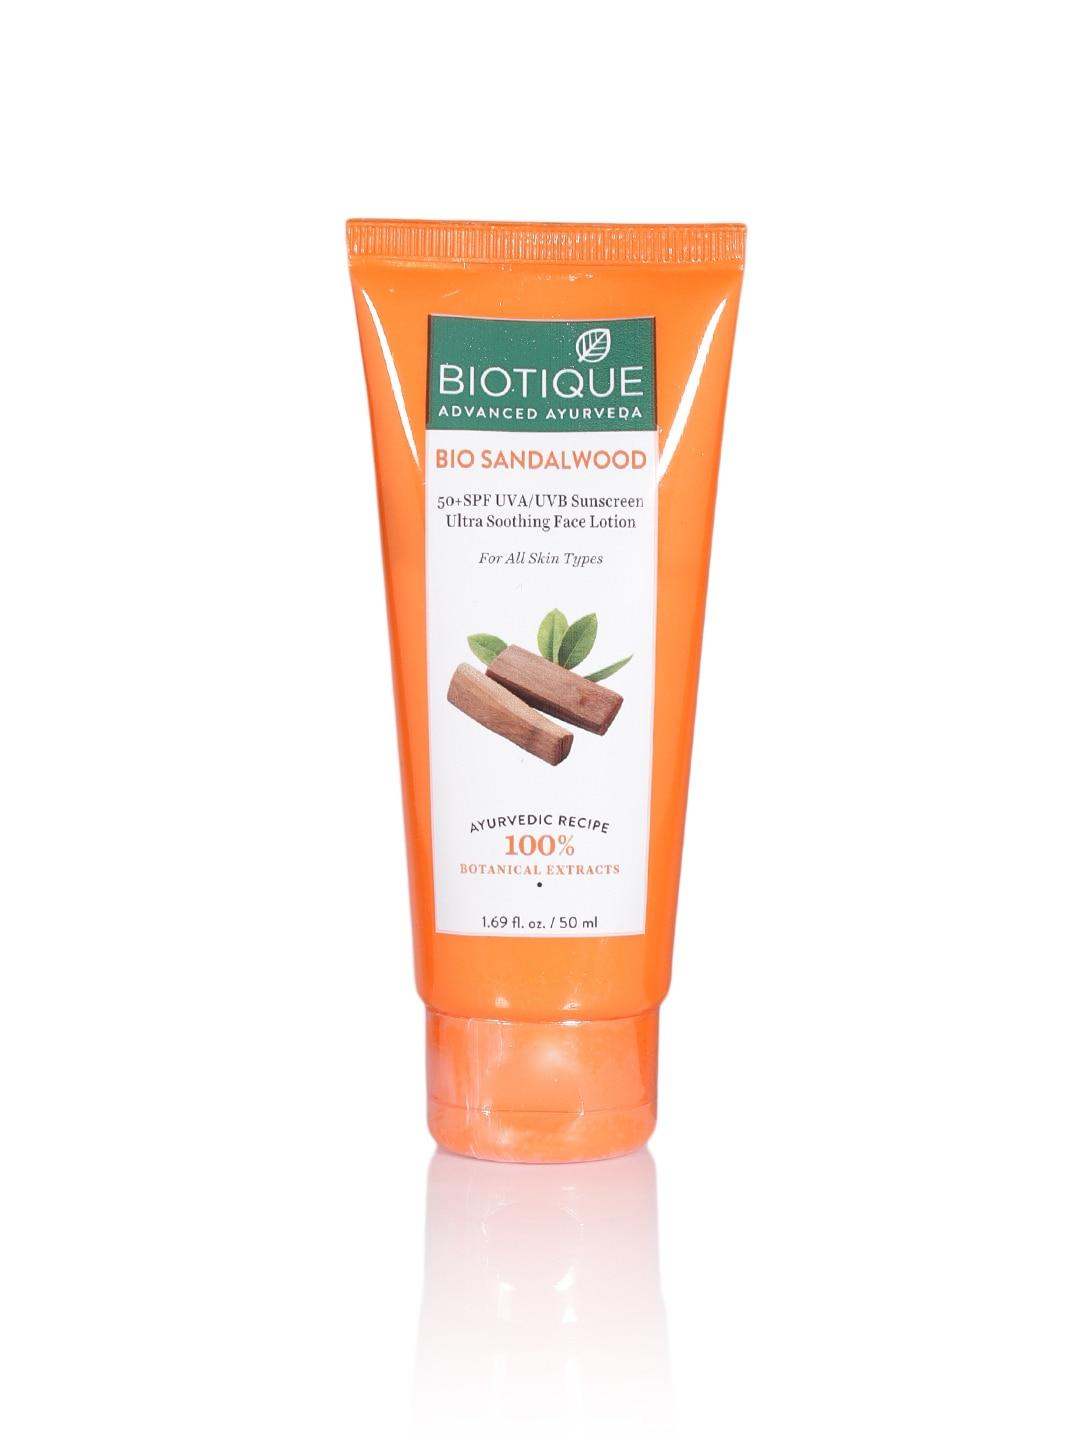 biotique bio sandalwood sunscreen ultra soothing face lotion 50+ spf - 50 ml